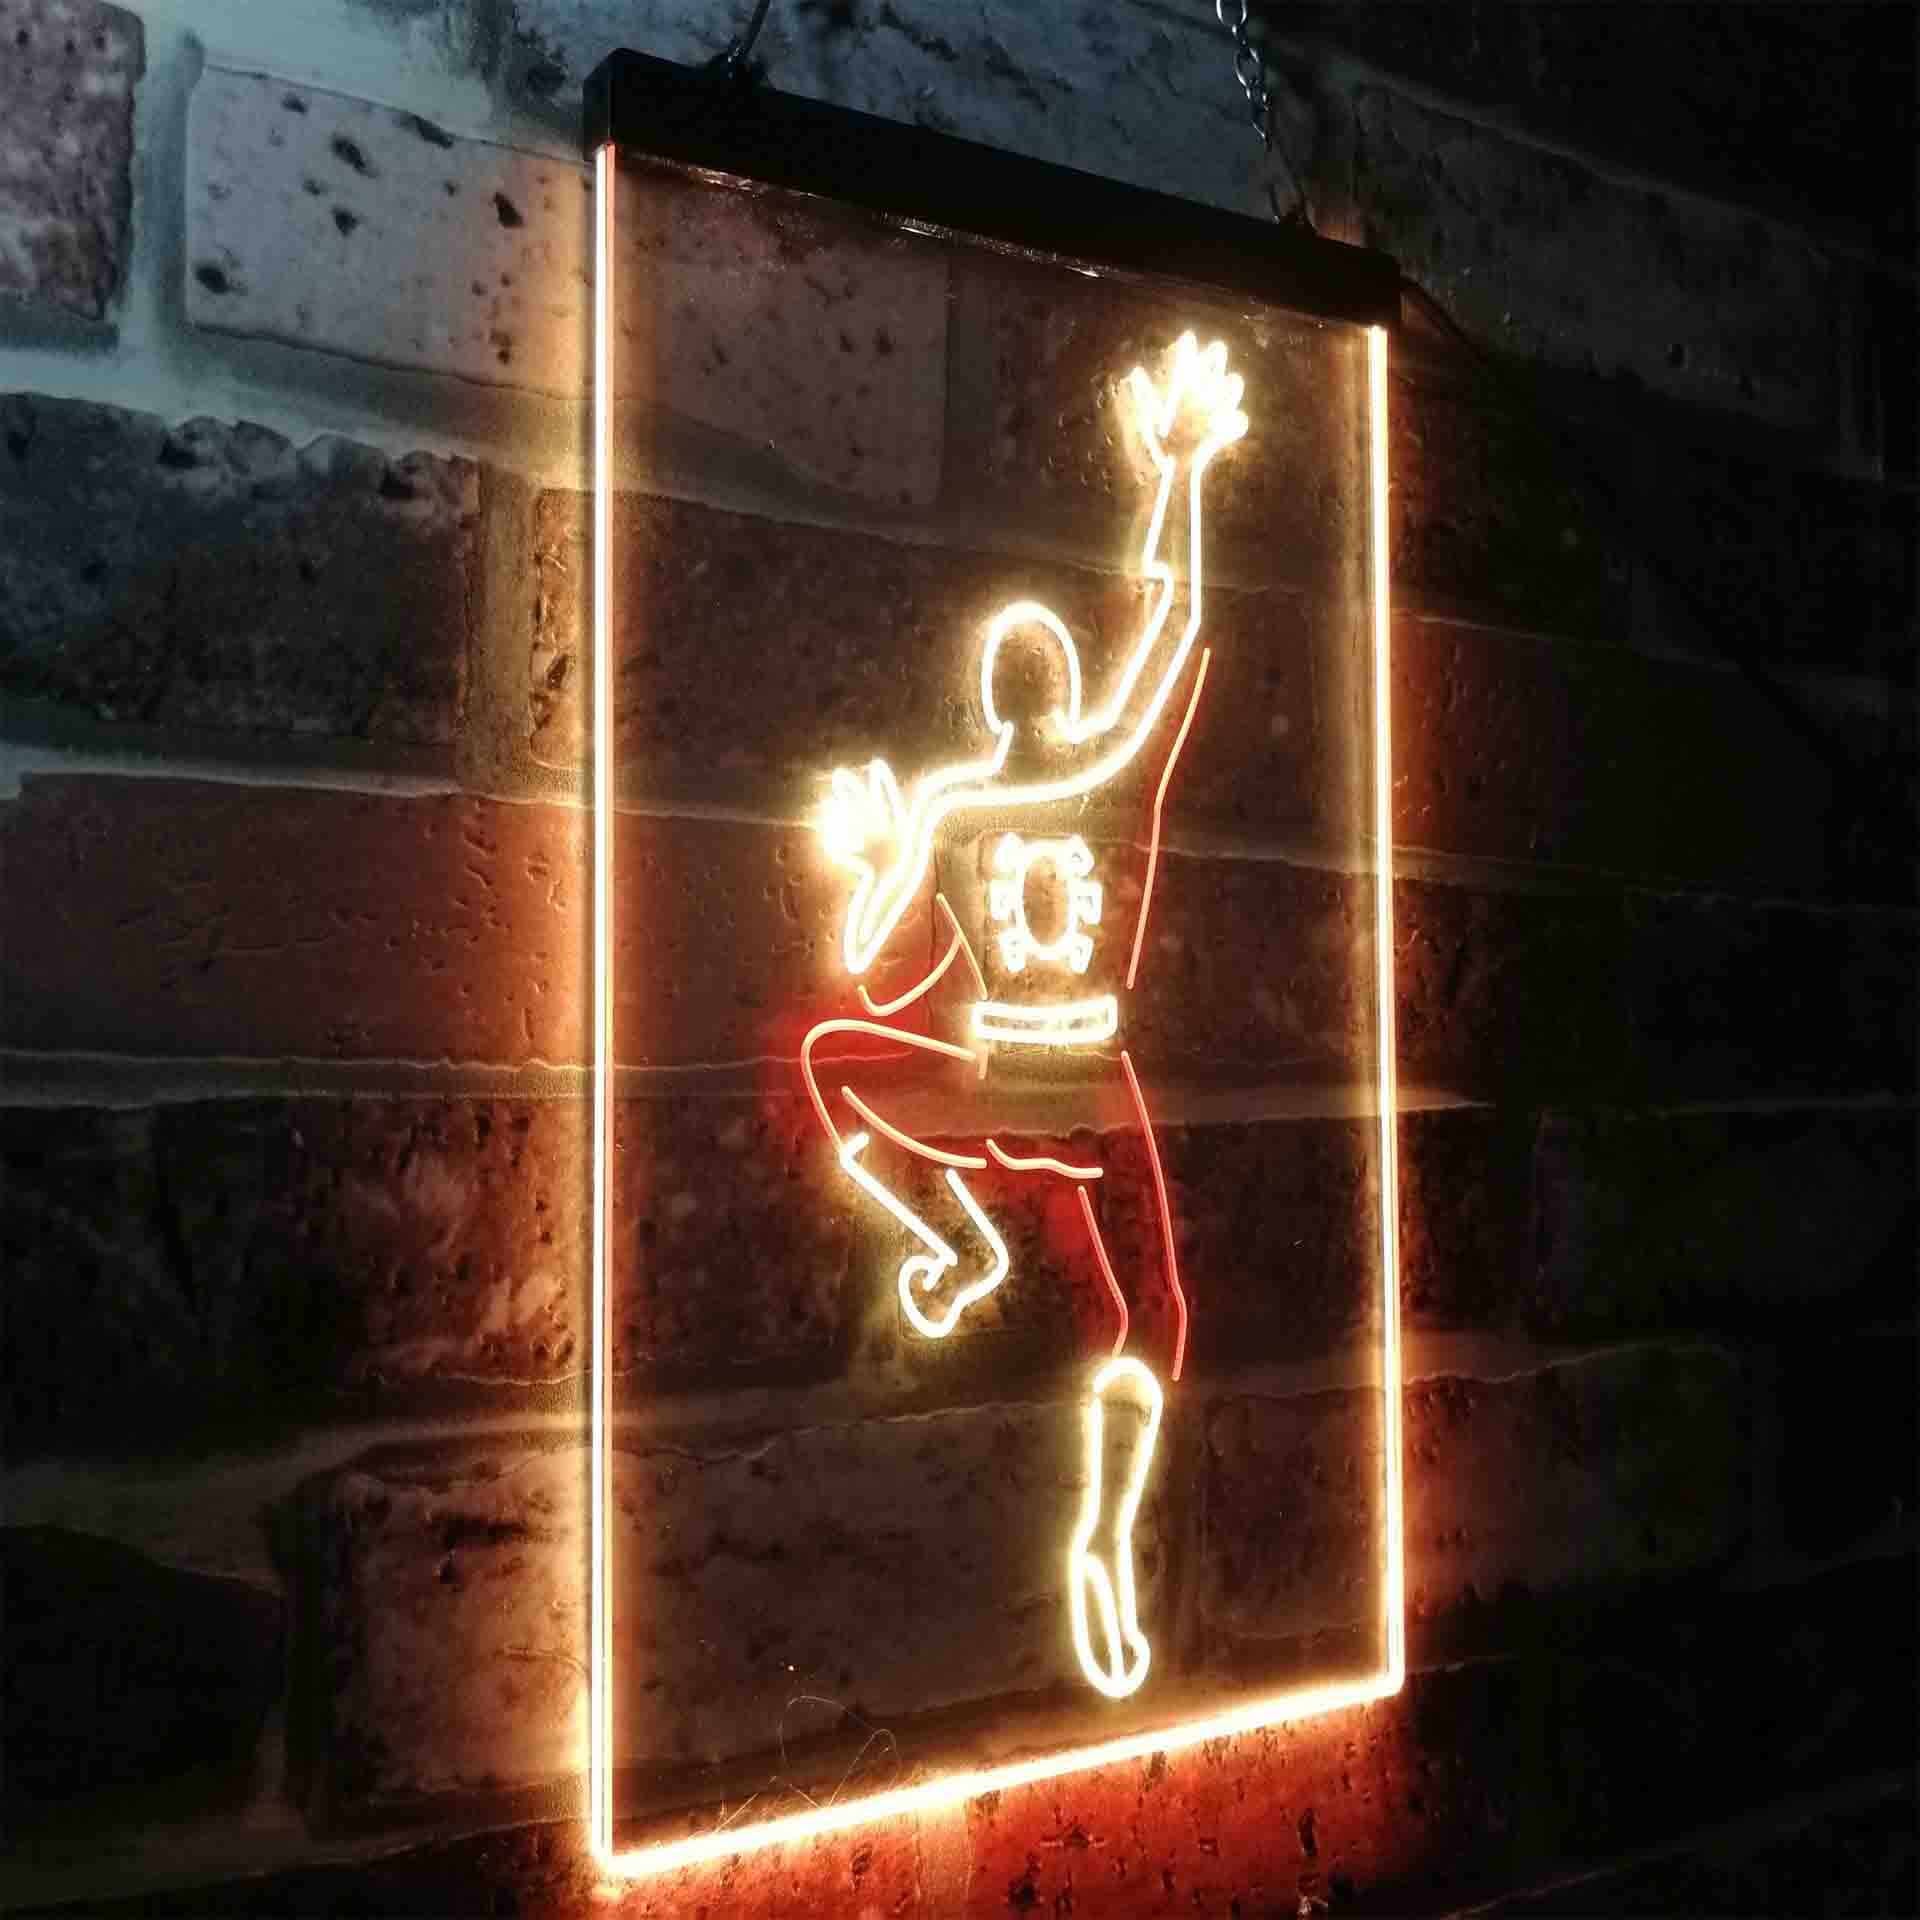 Spider Man Climbing Marvels Neon LED Sign